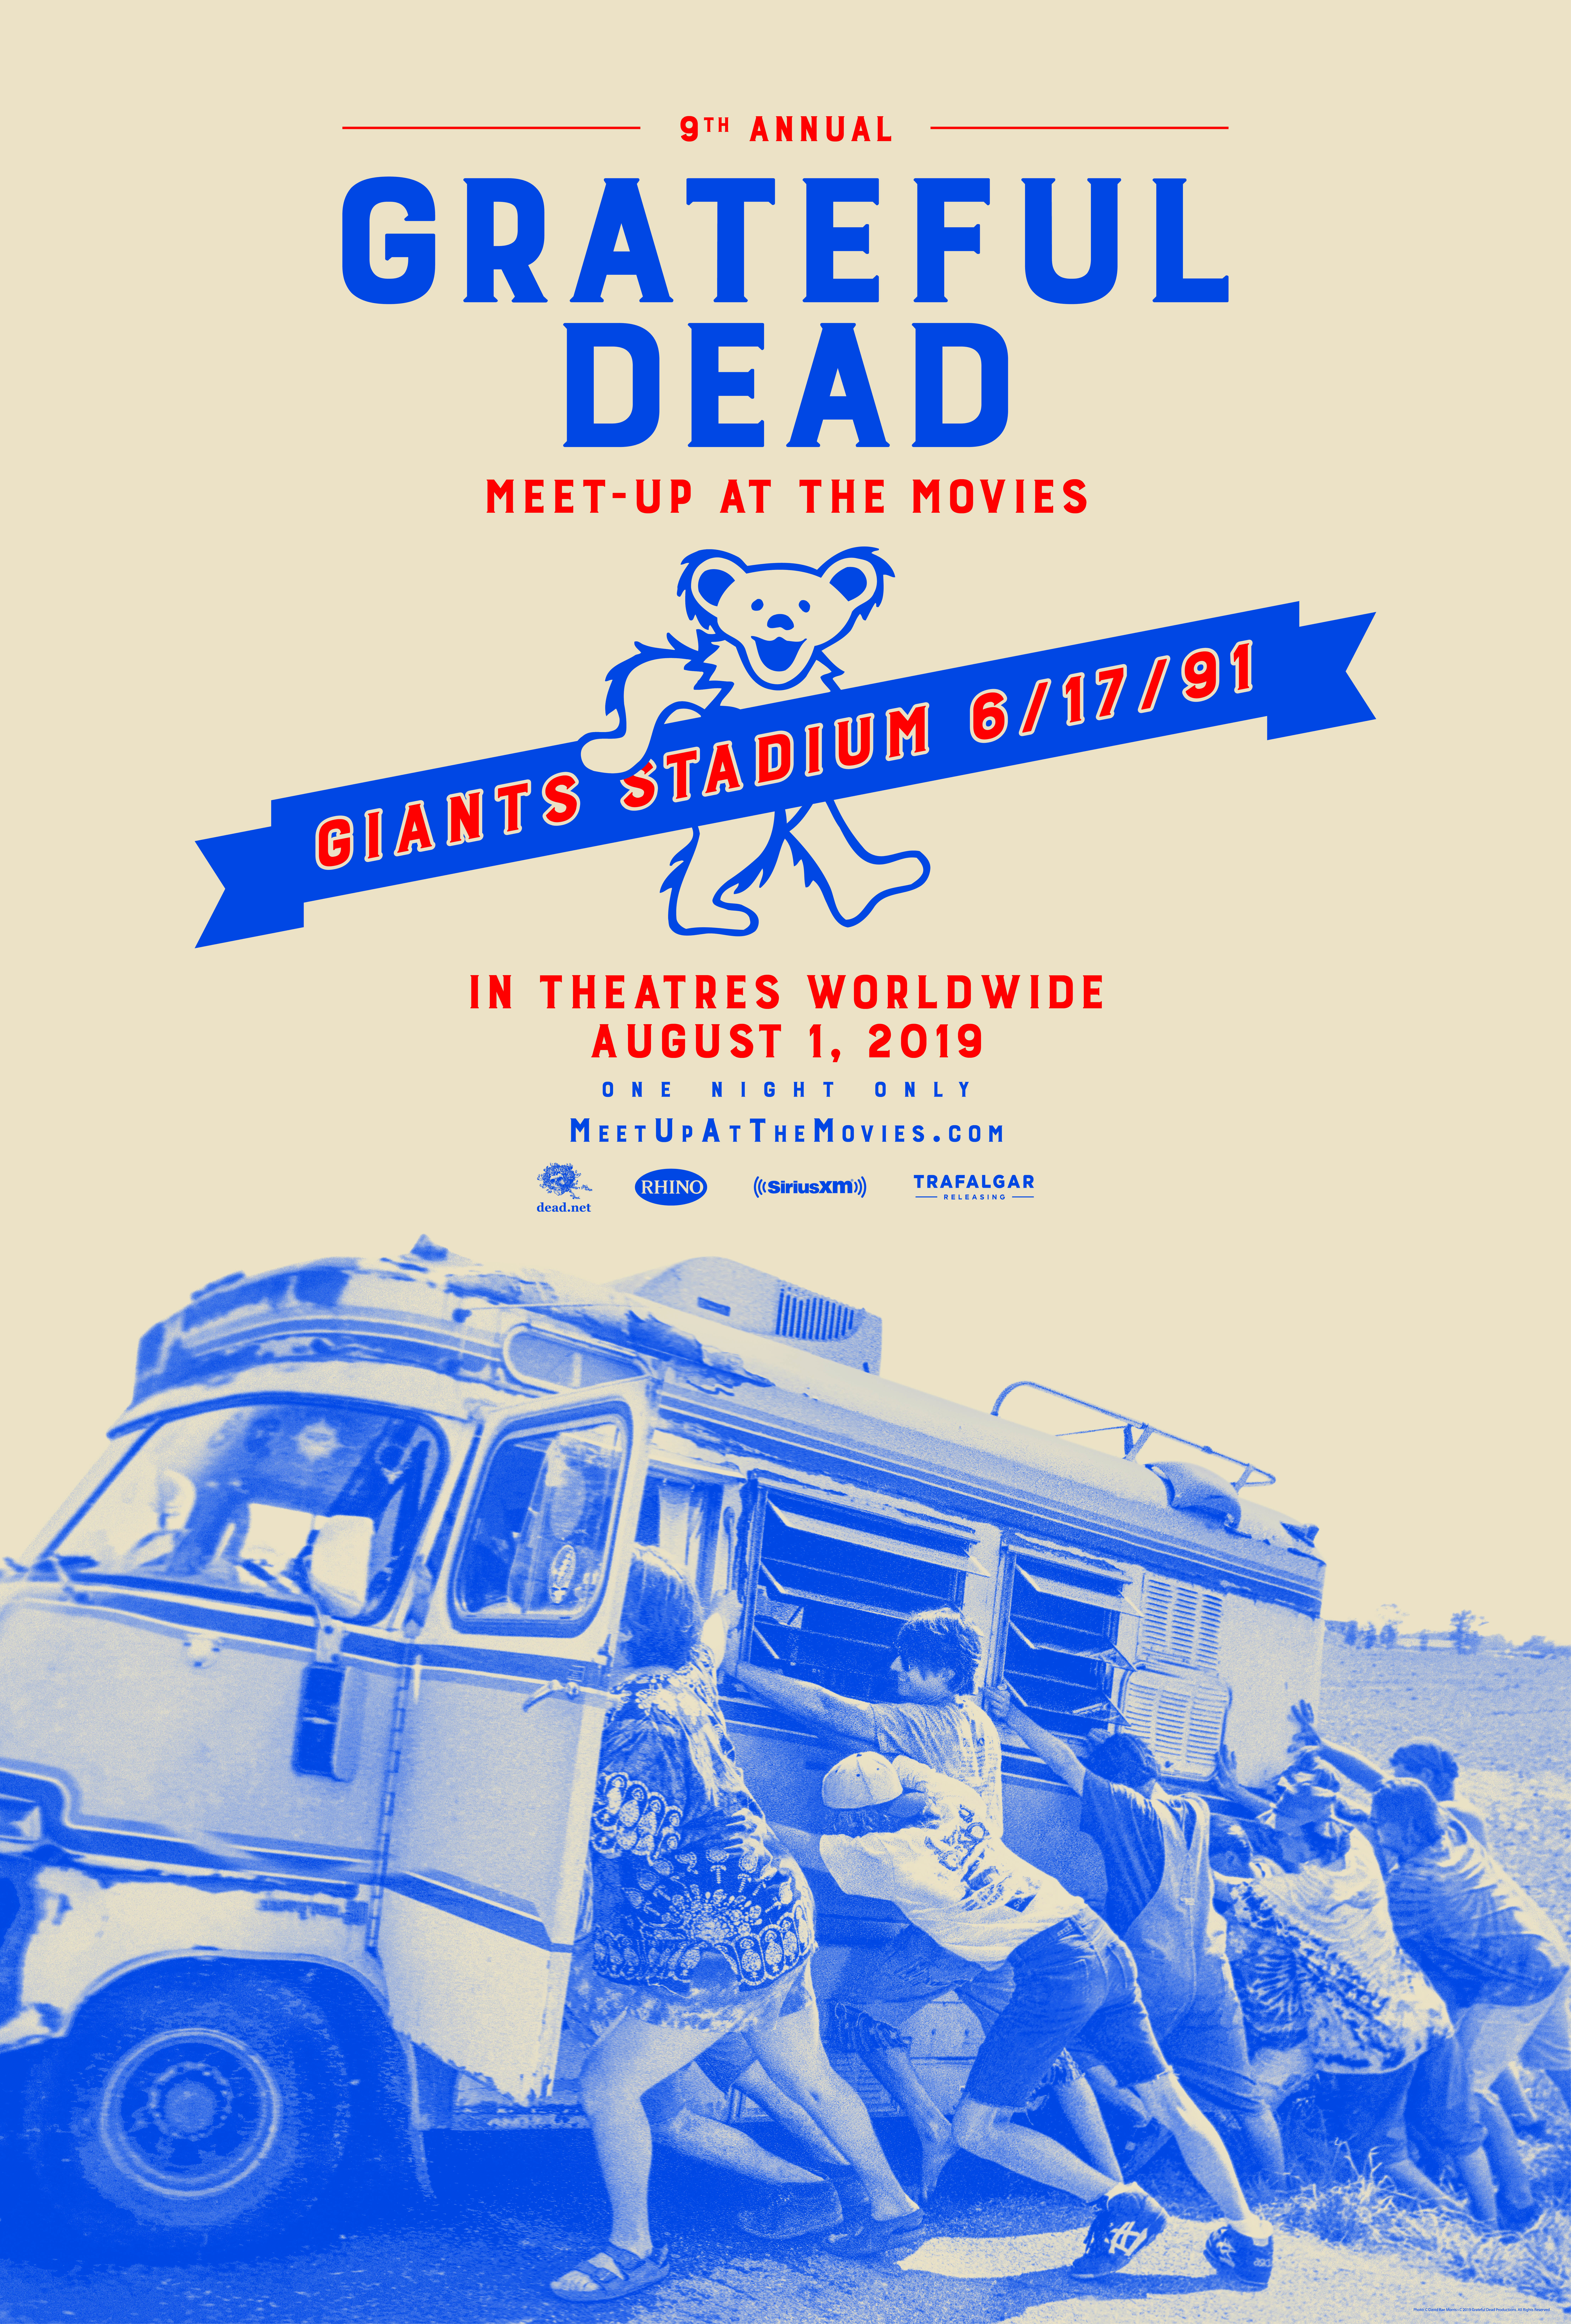 Poster artwork for the 9th Annual Grateful Dead Meet-Up At The Movies taking place in theaters worldwide on Thursday, August 1